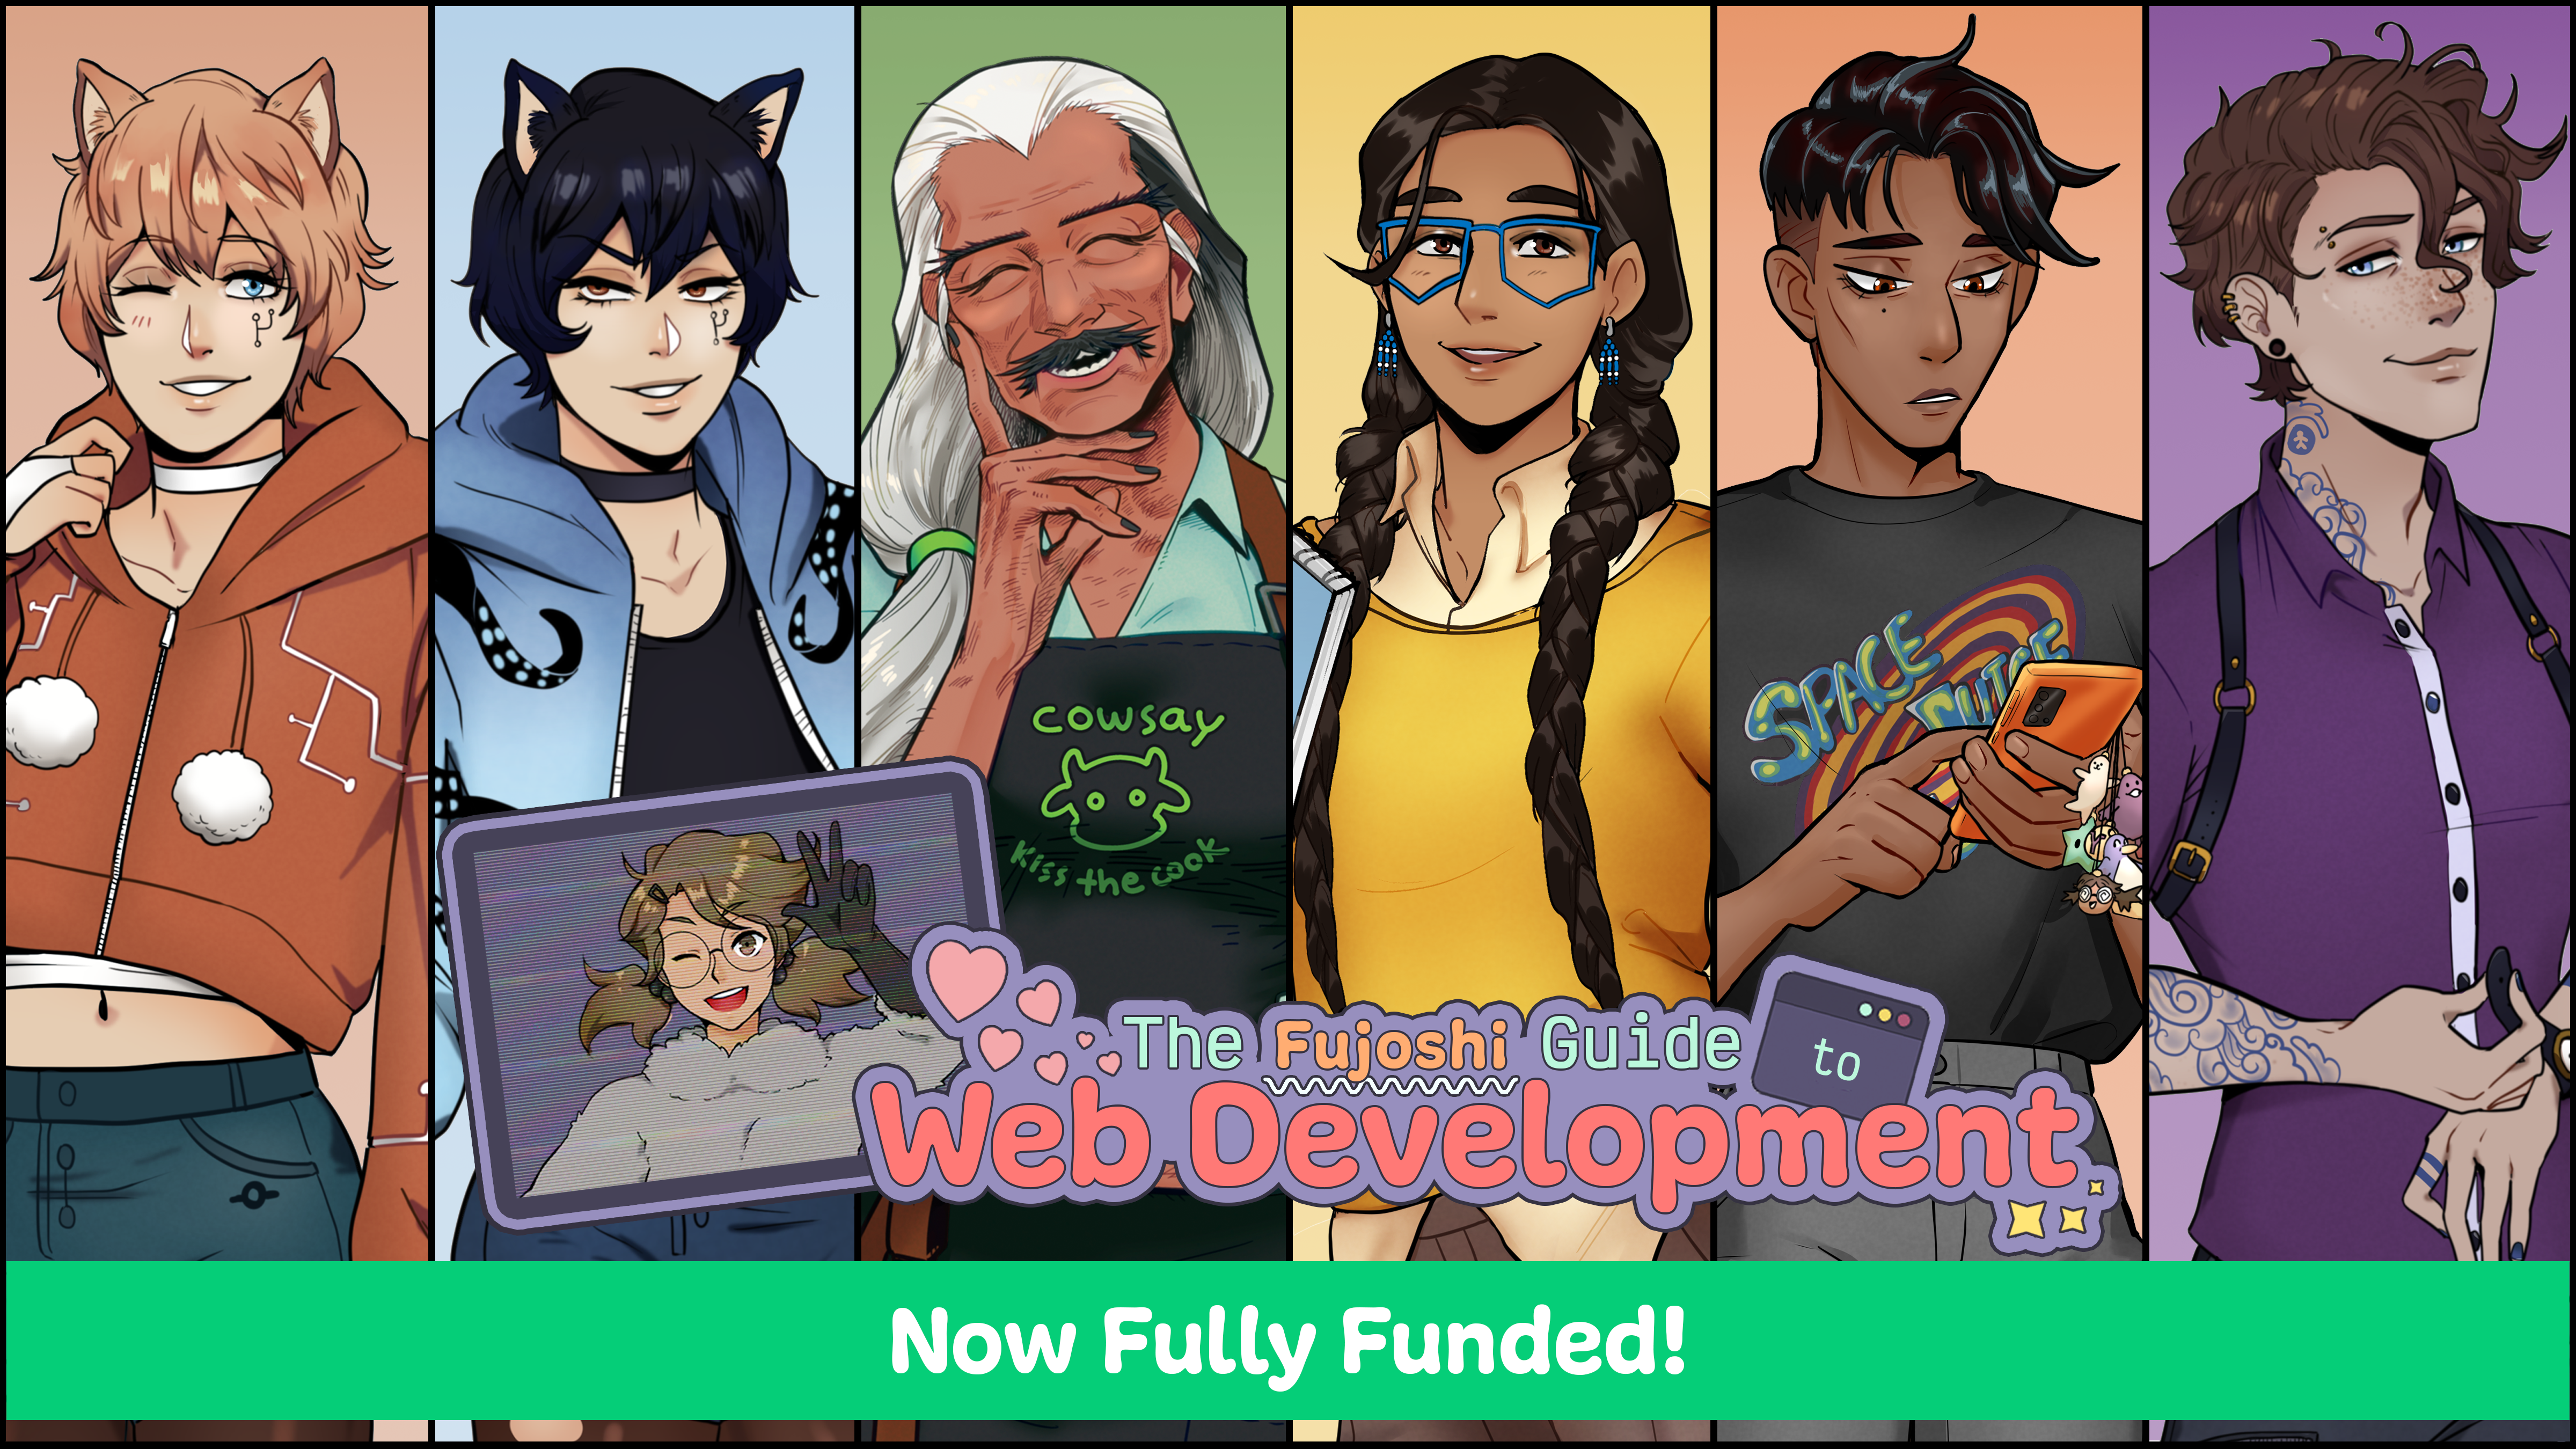 The Fujoshi Guide to Web Development's project preview image